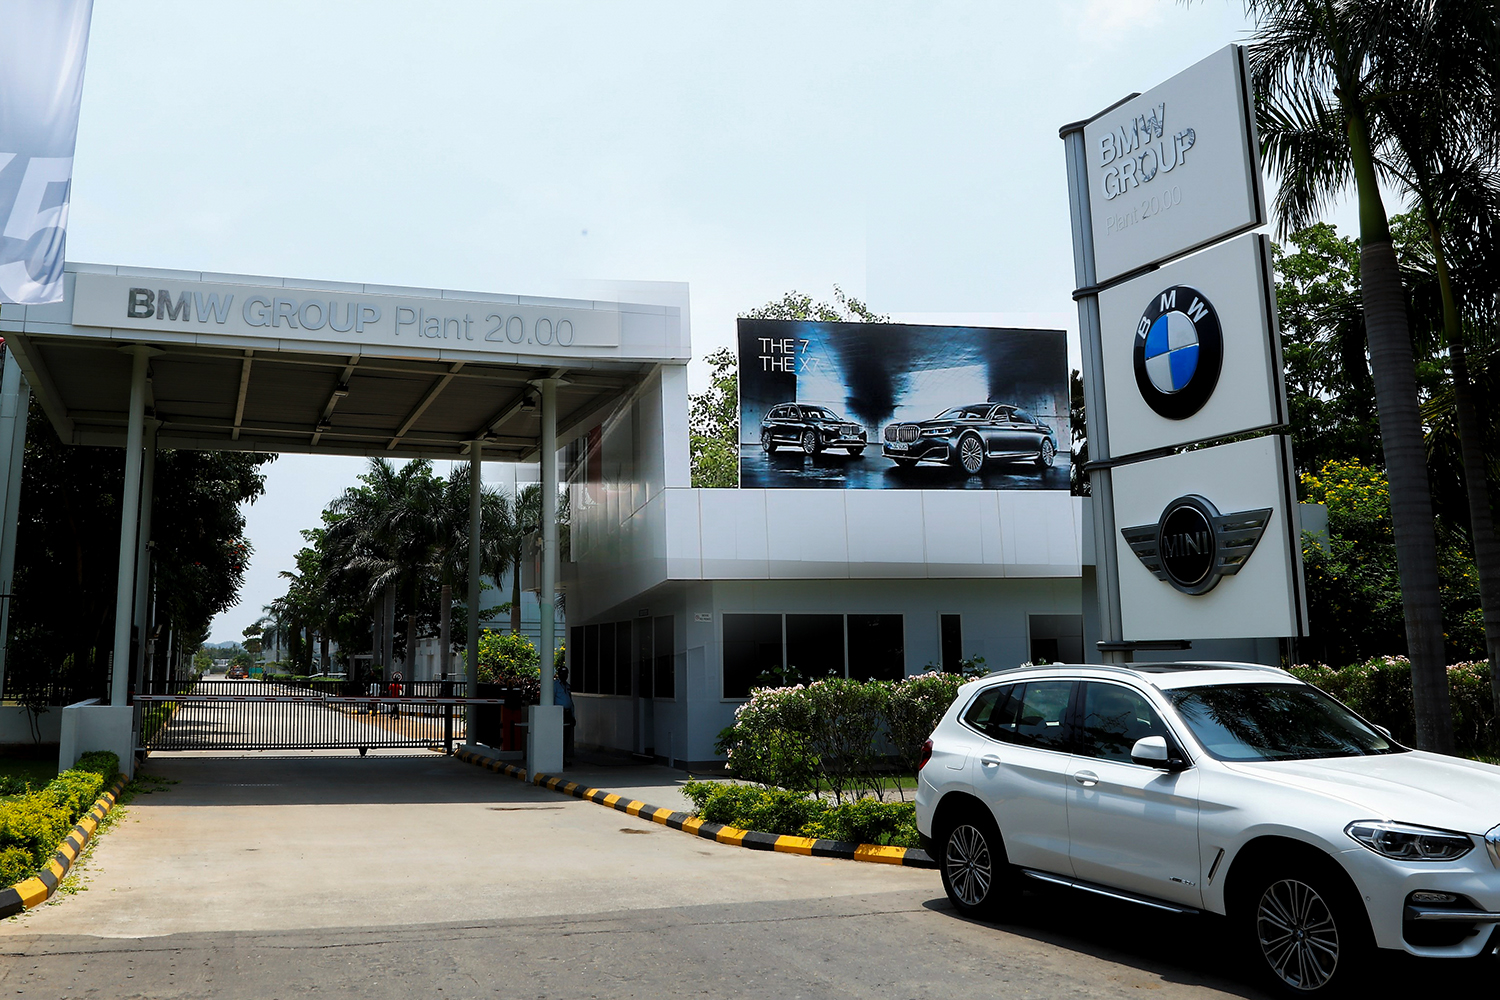 The picture shows the welcome Desk at the BMW Group offices.